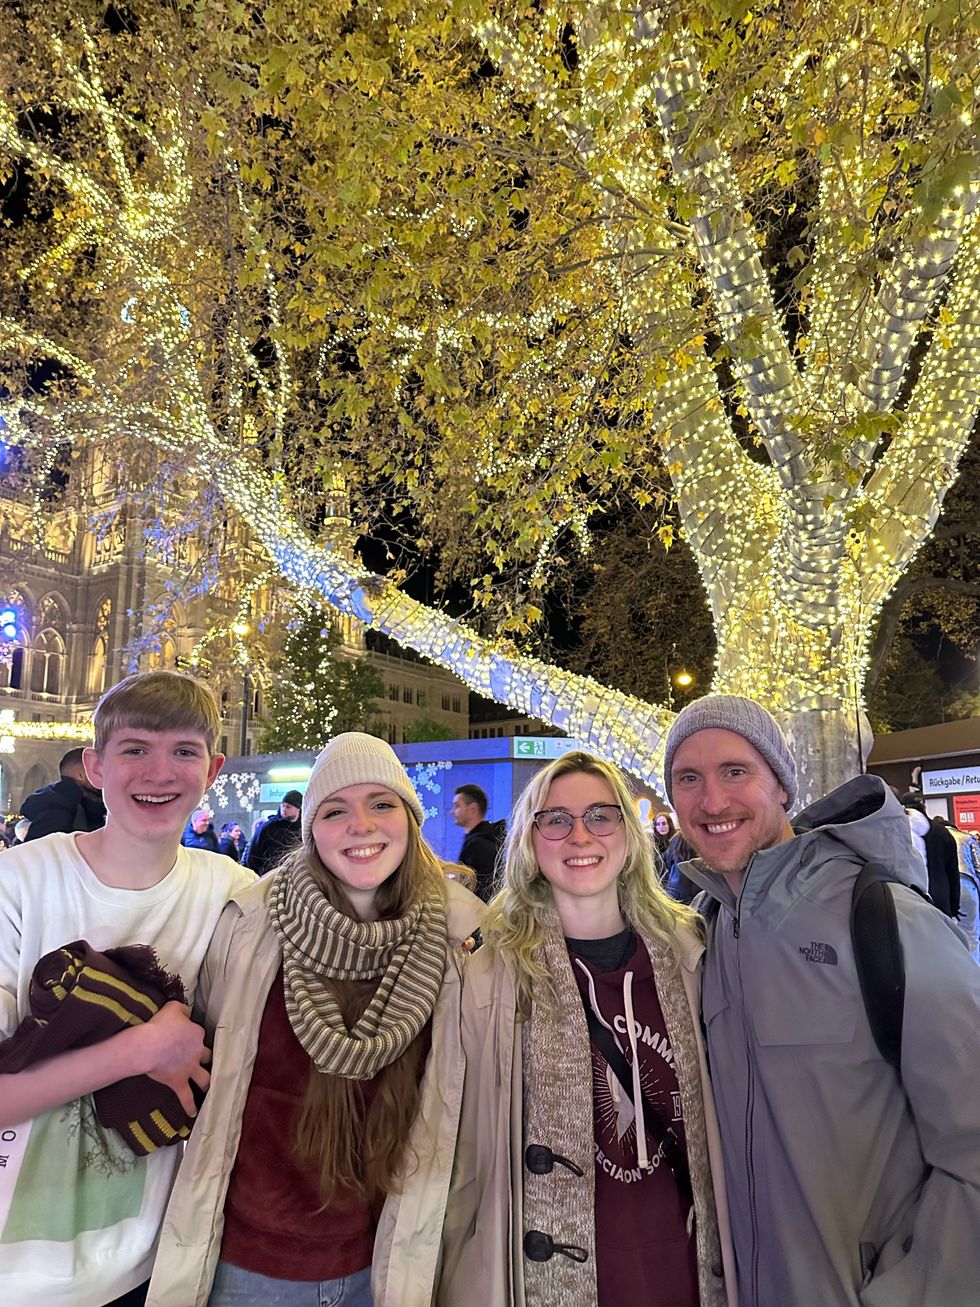 Four people standing in front of a lit up tree